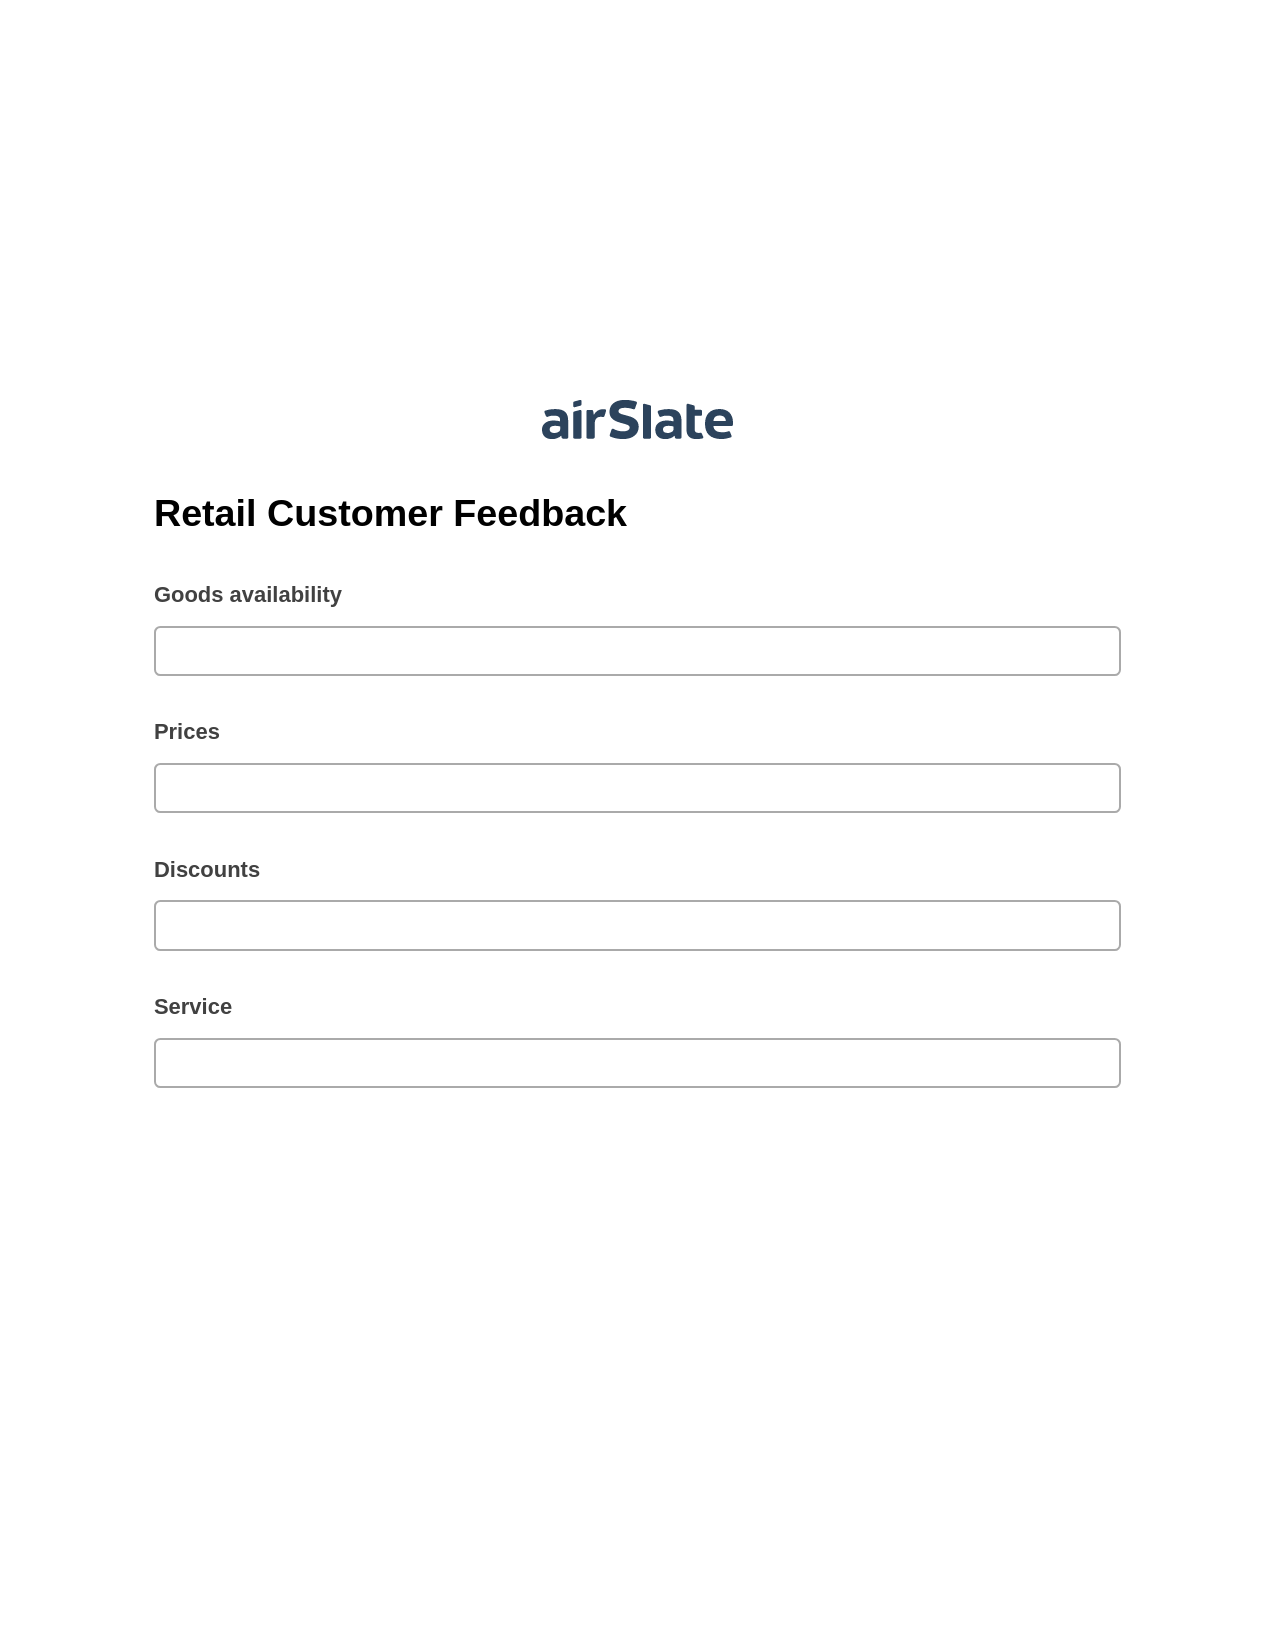 Retail Customer Feedback Pre-fill from Excel Spreadsheet Bot, Update NetSuite Records Bot, Export to Smartsheet